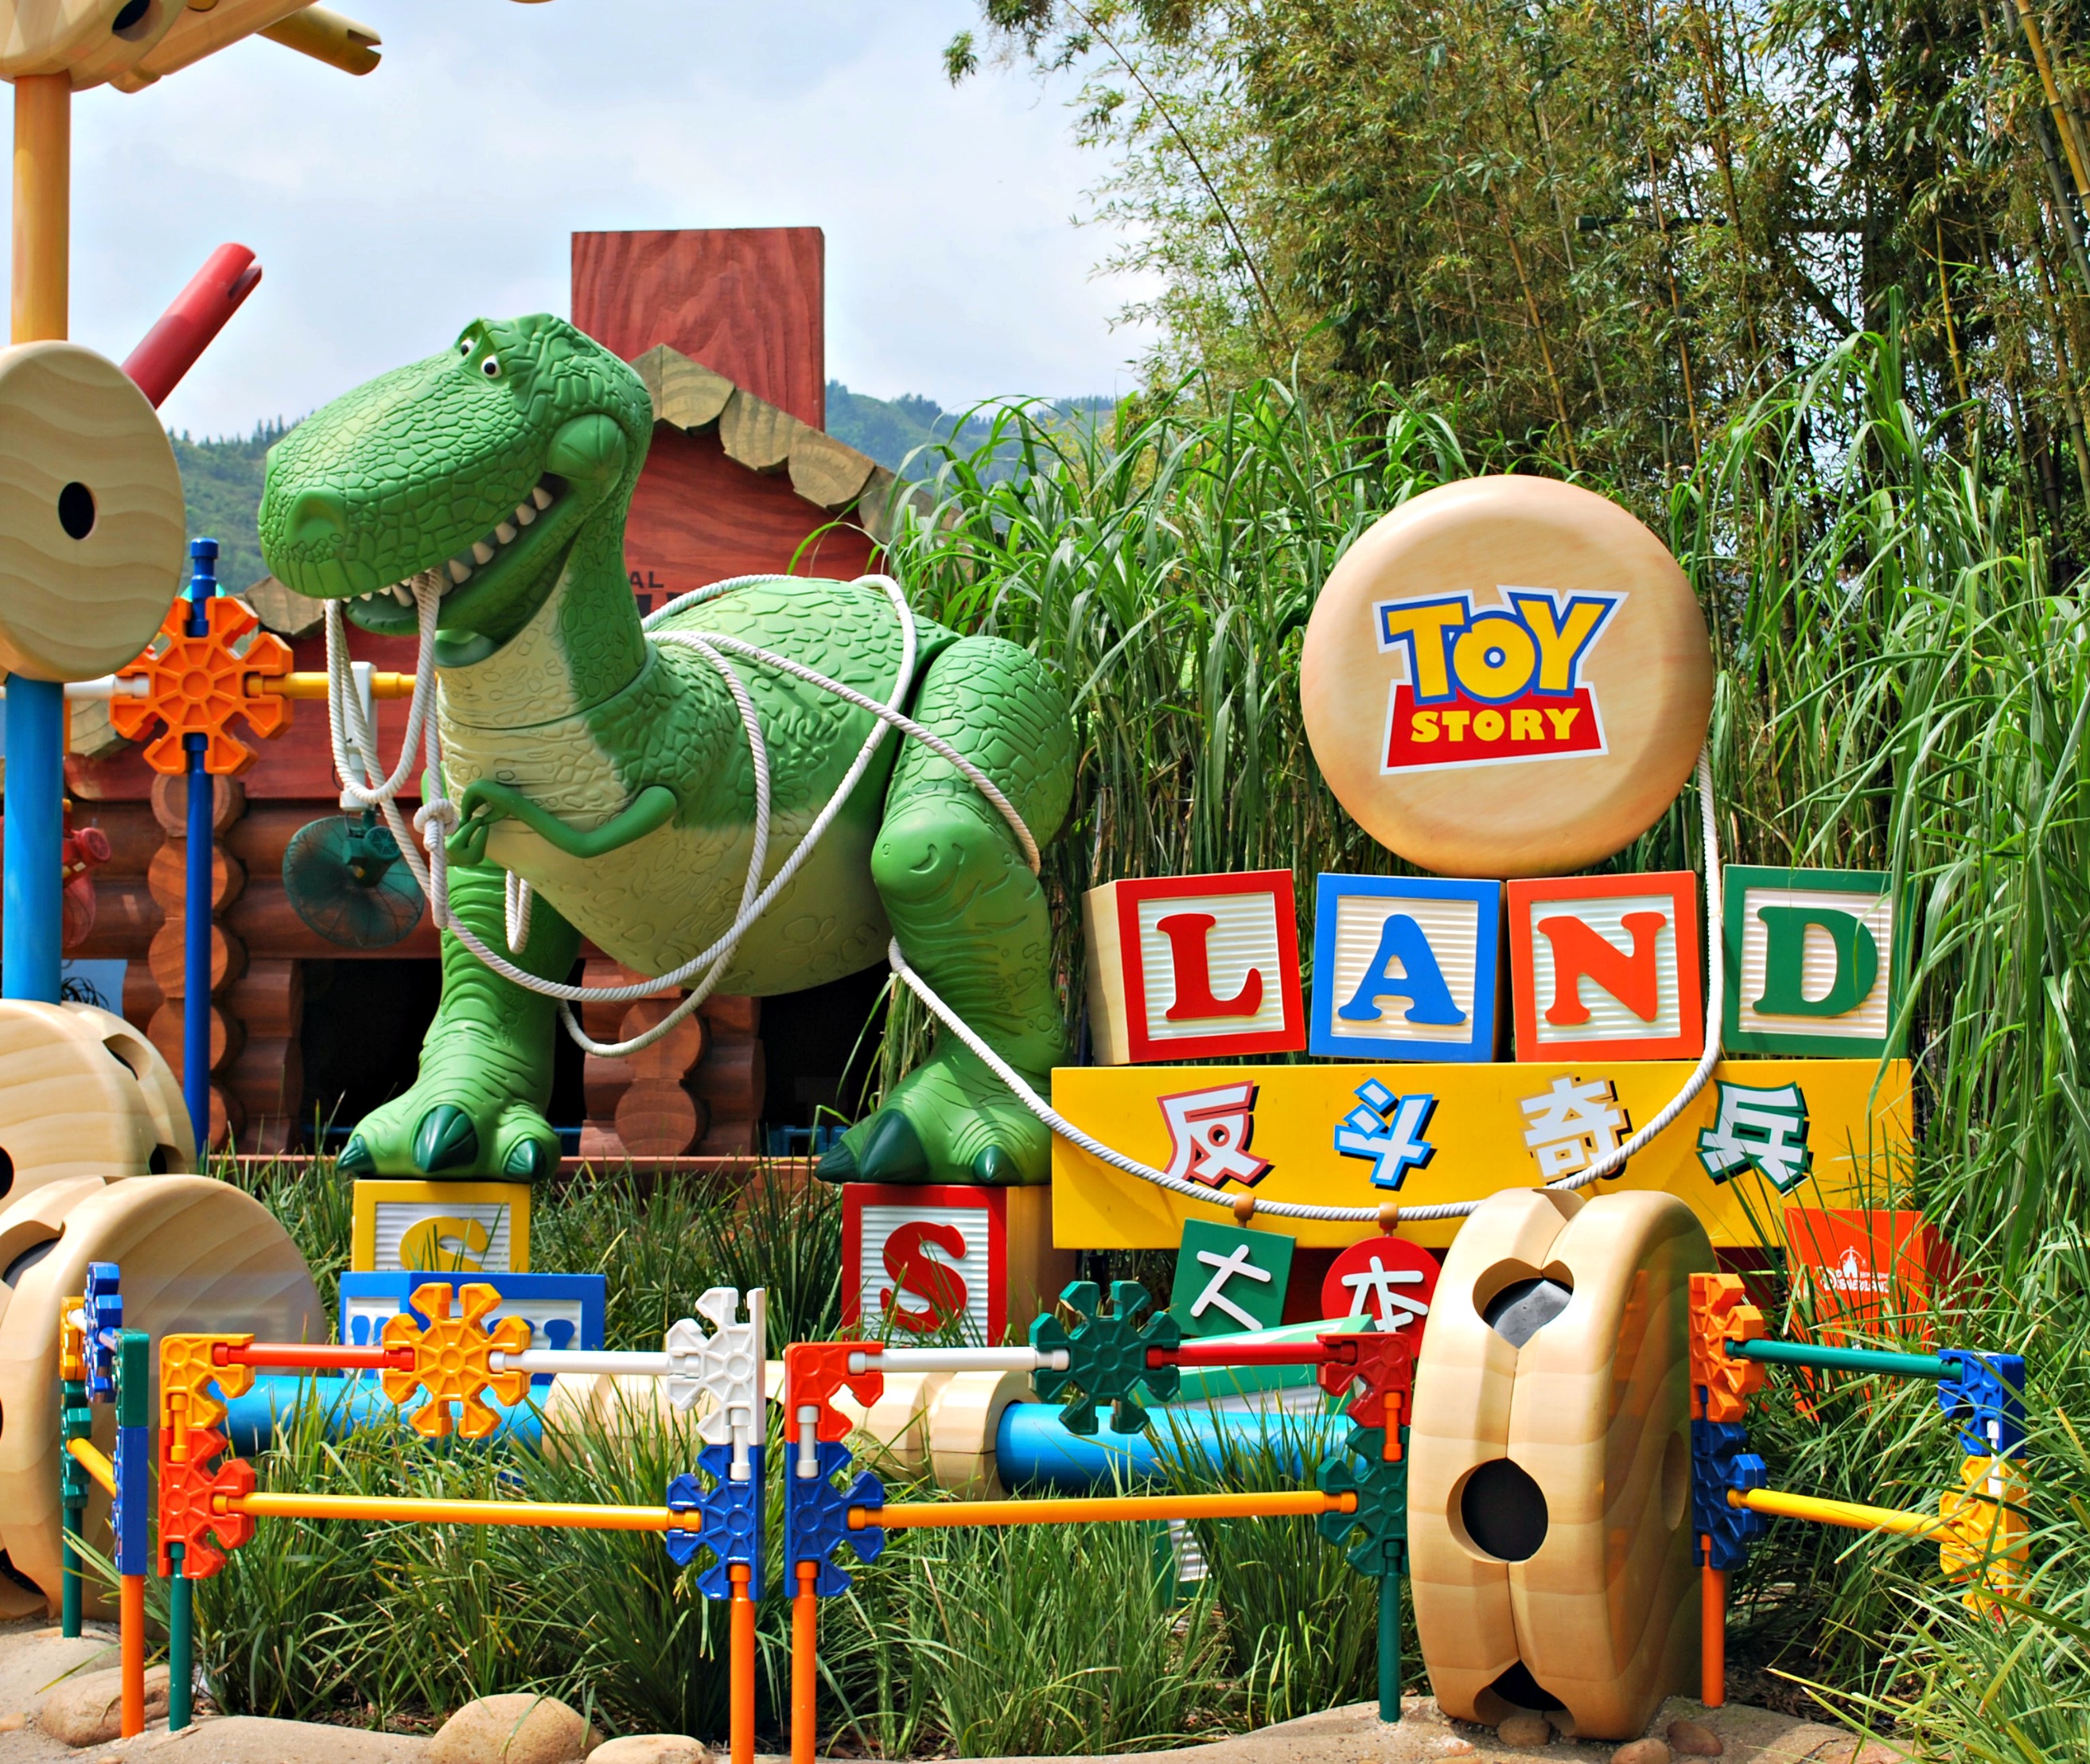 toy-story-land-sign.jpg